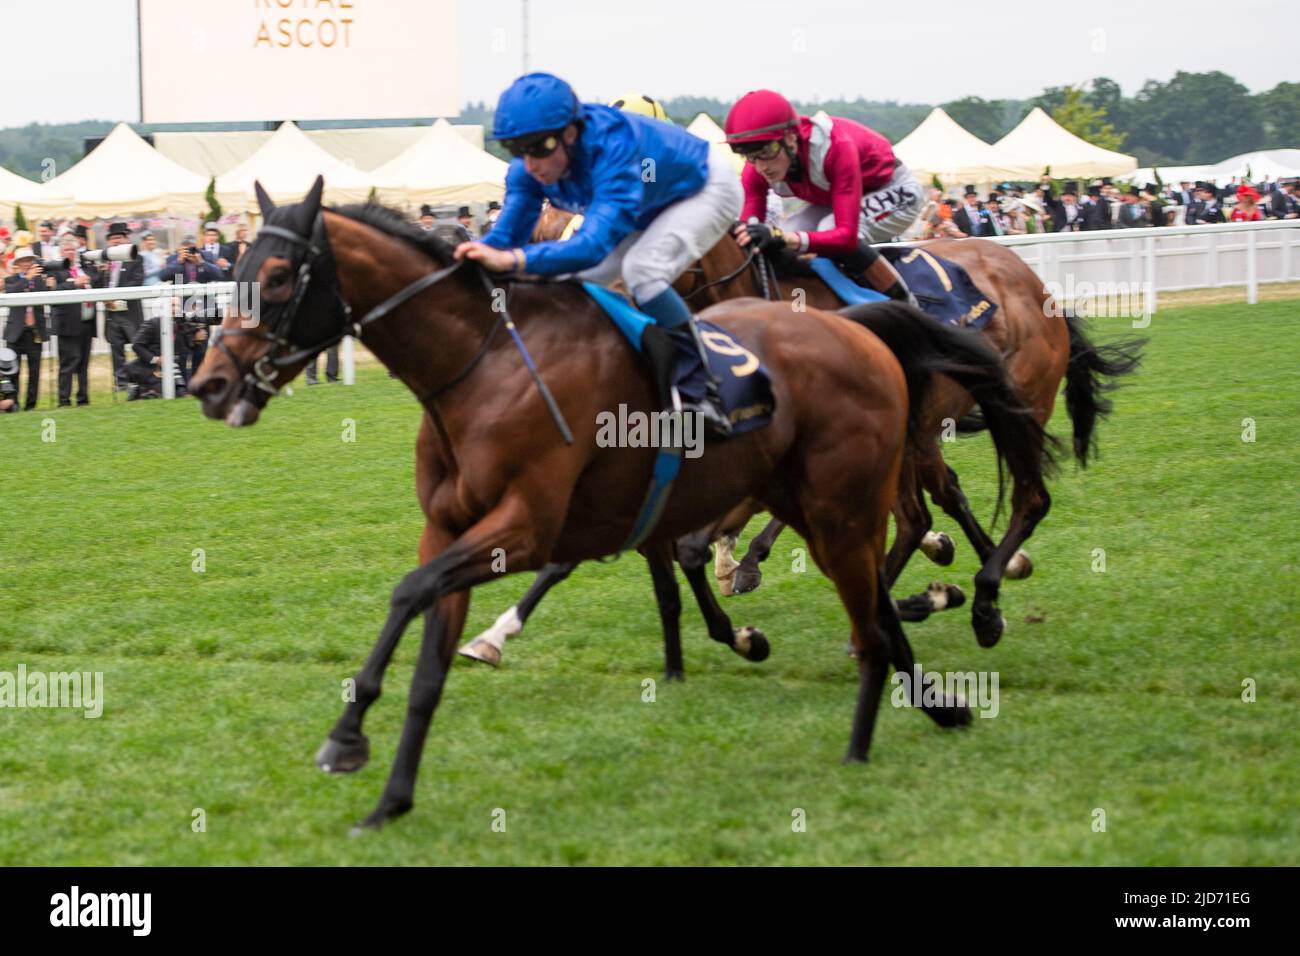 Ascot, Berkshire, UK. 18th June, 2022. Horse Noble Truth ridden by jockey William Buick wins the Jersey Stakes. Owner, Godolphin. Trainer Charlie Appleby. Credit: Maureen McLean/Alamy Live News Stock Photo